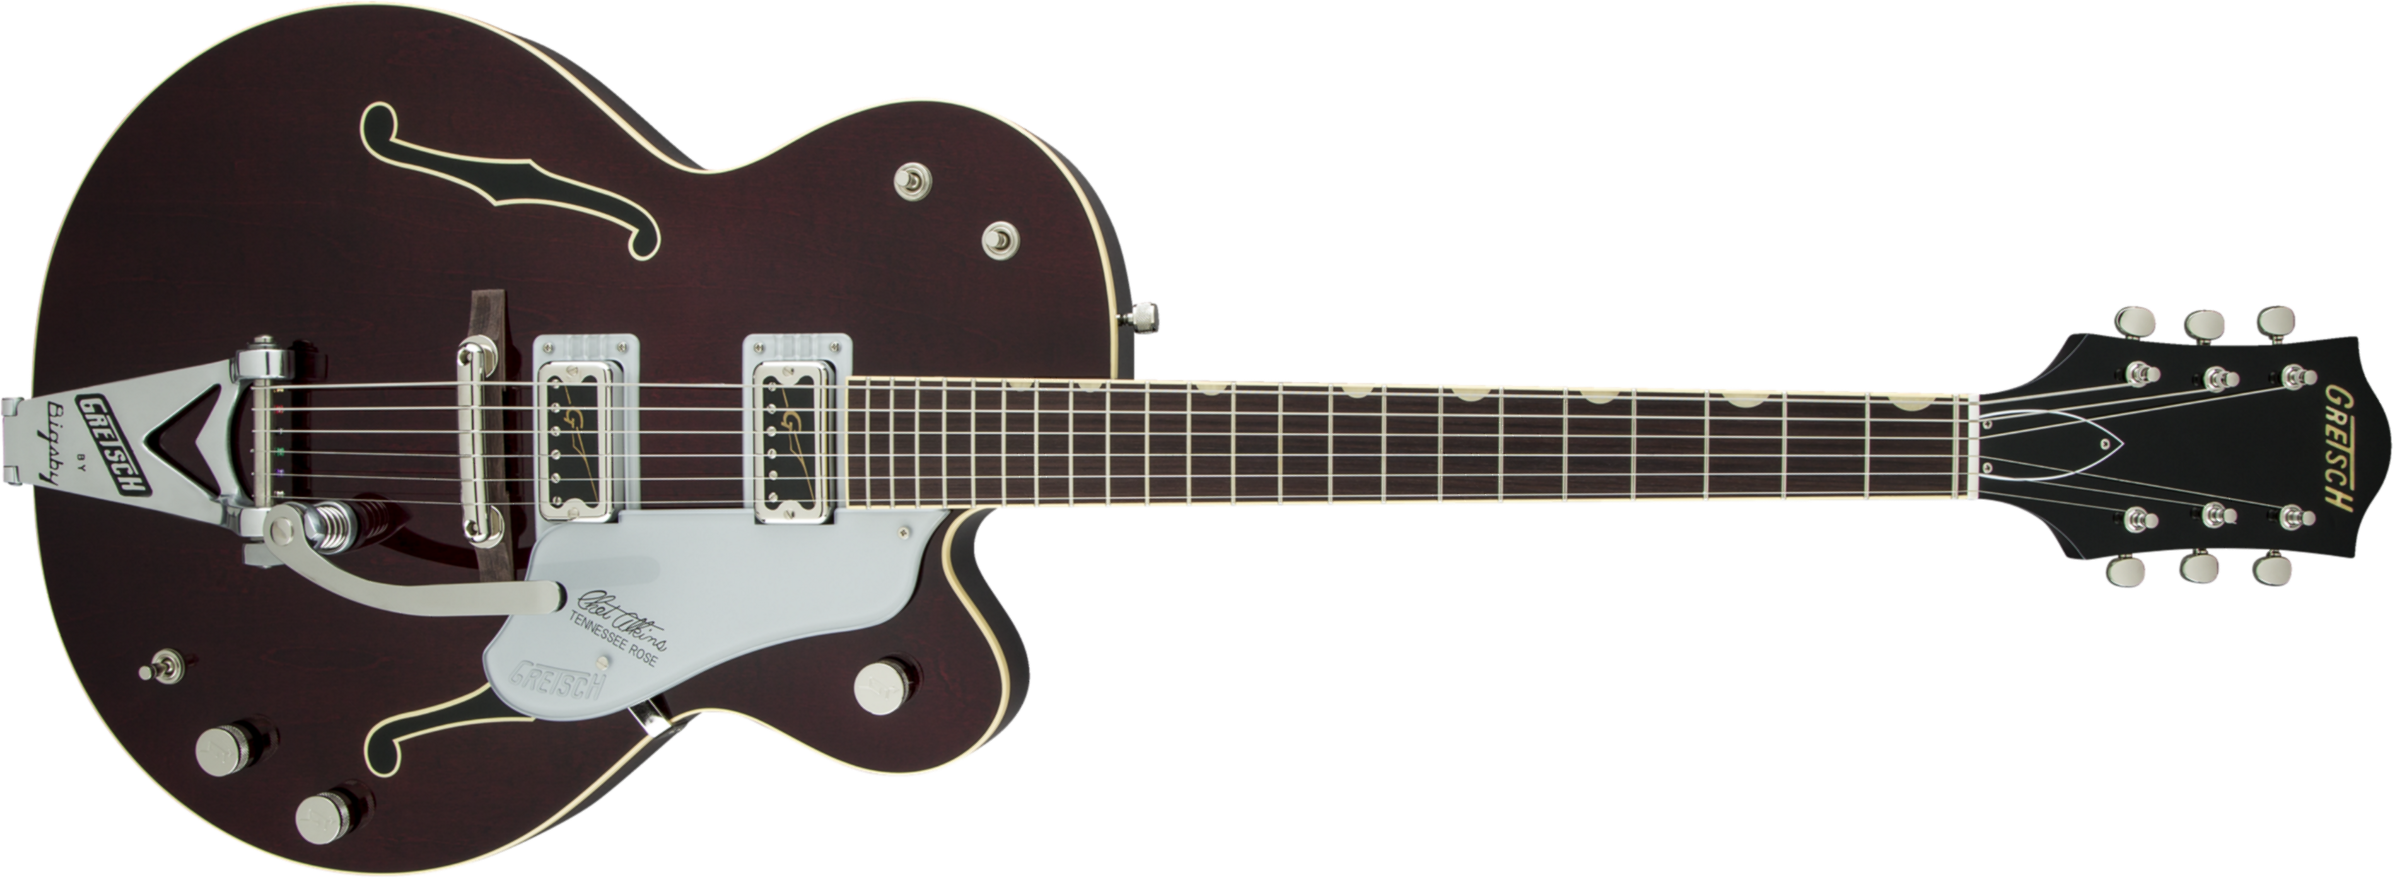 Gretsch G6119t-62vs Chet Atkins Tennessee Rose 2h Trem Rw - Dark Cherry Stain - Semi-hollow electric guitar - Main picture